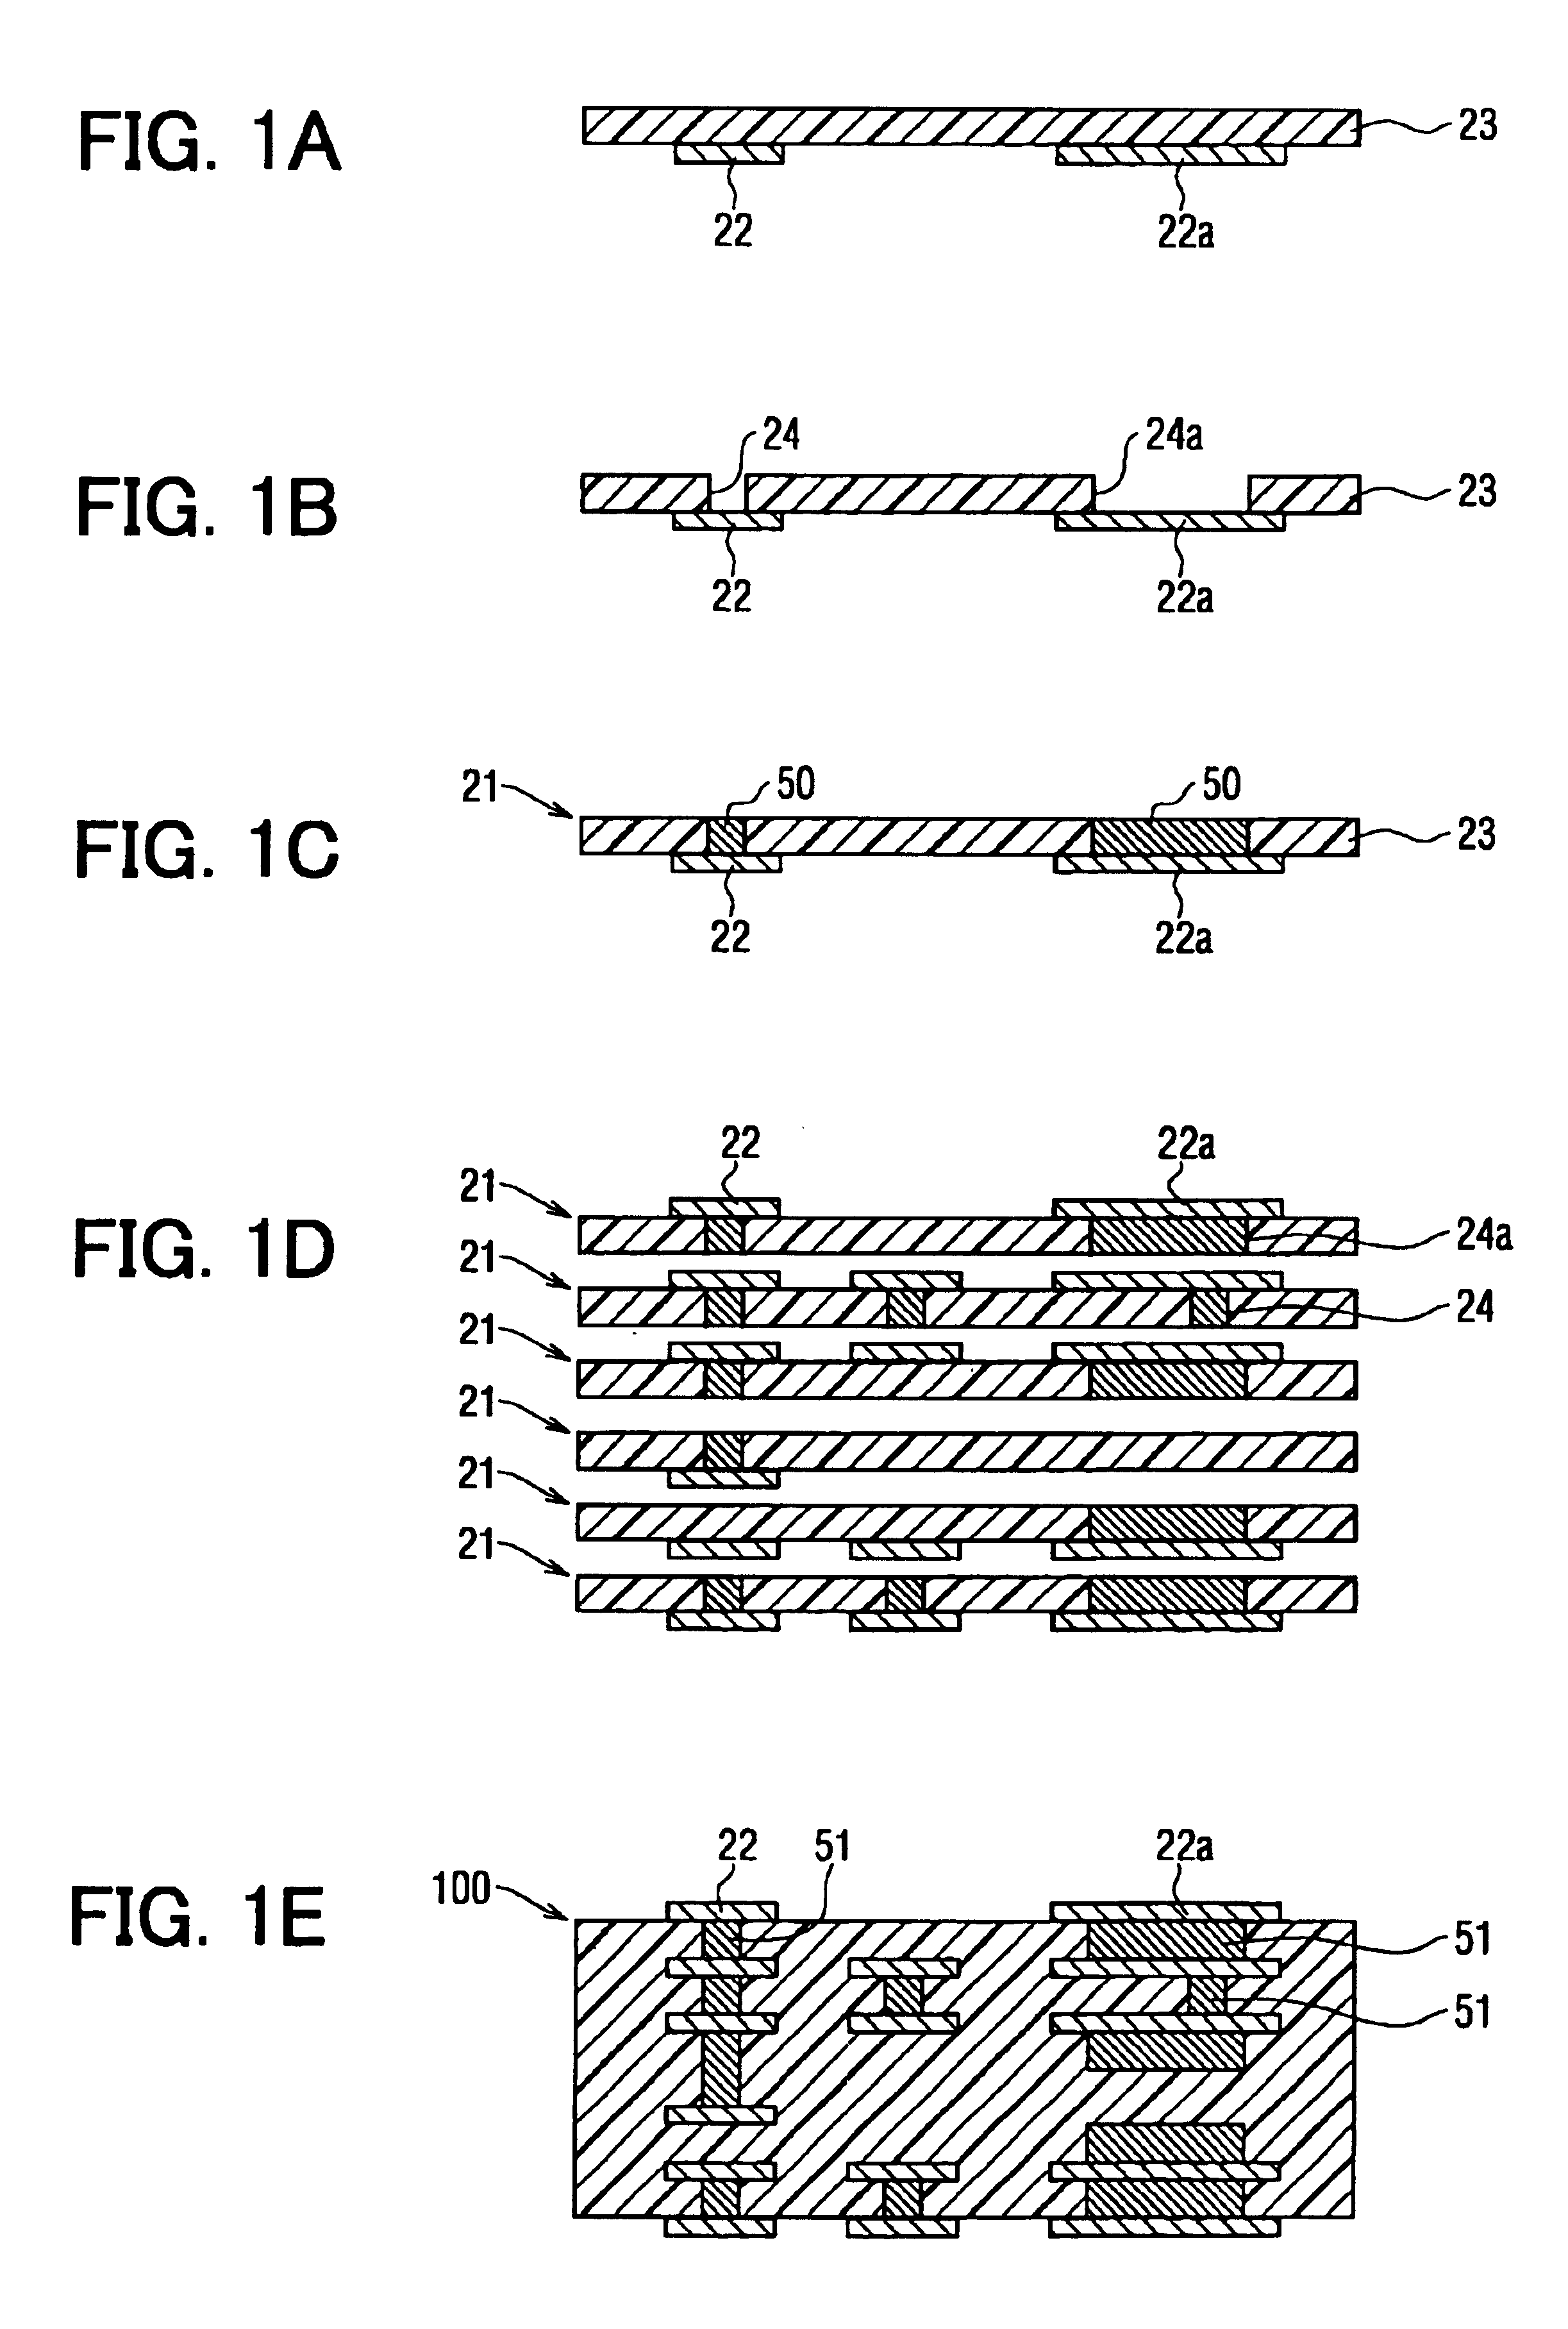 Enhancement of current-carrying capacity of a multilayer circuit board